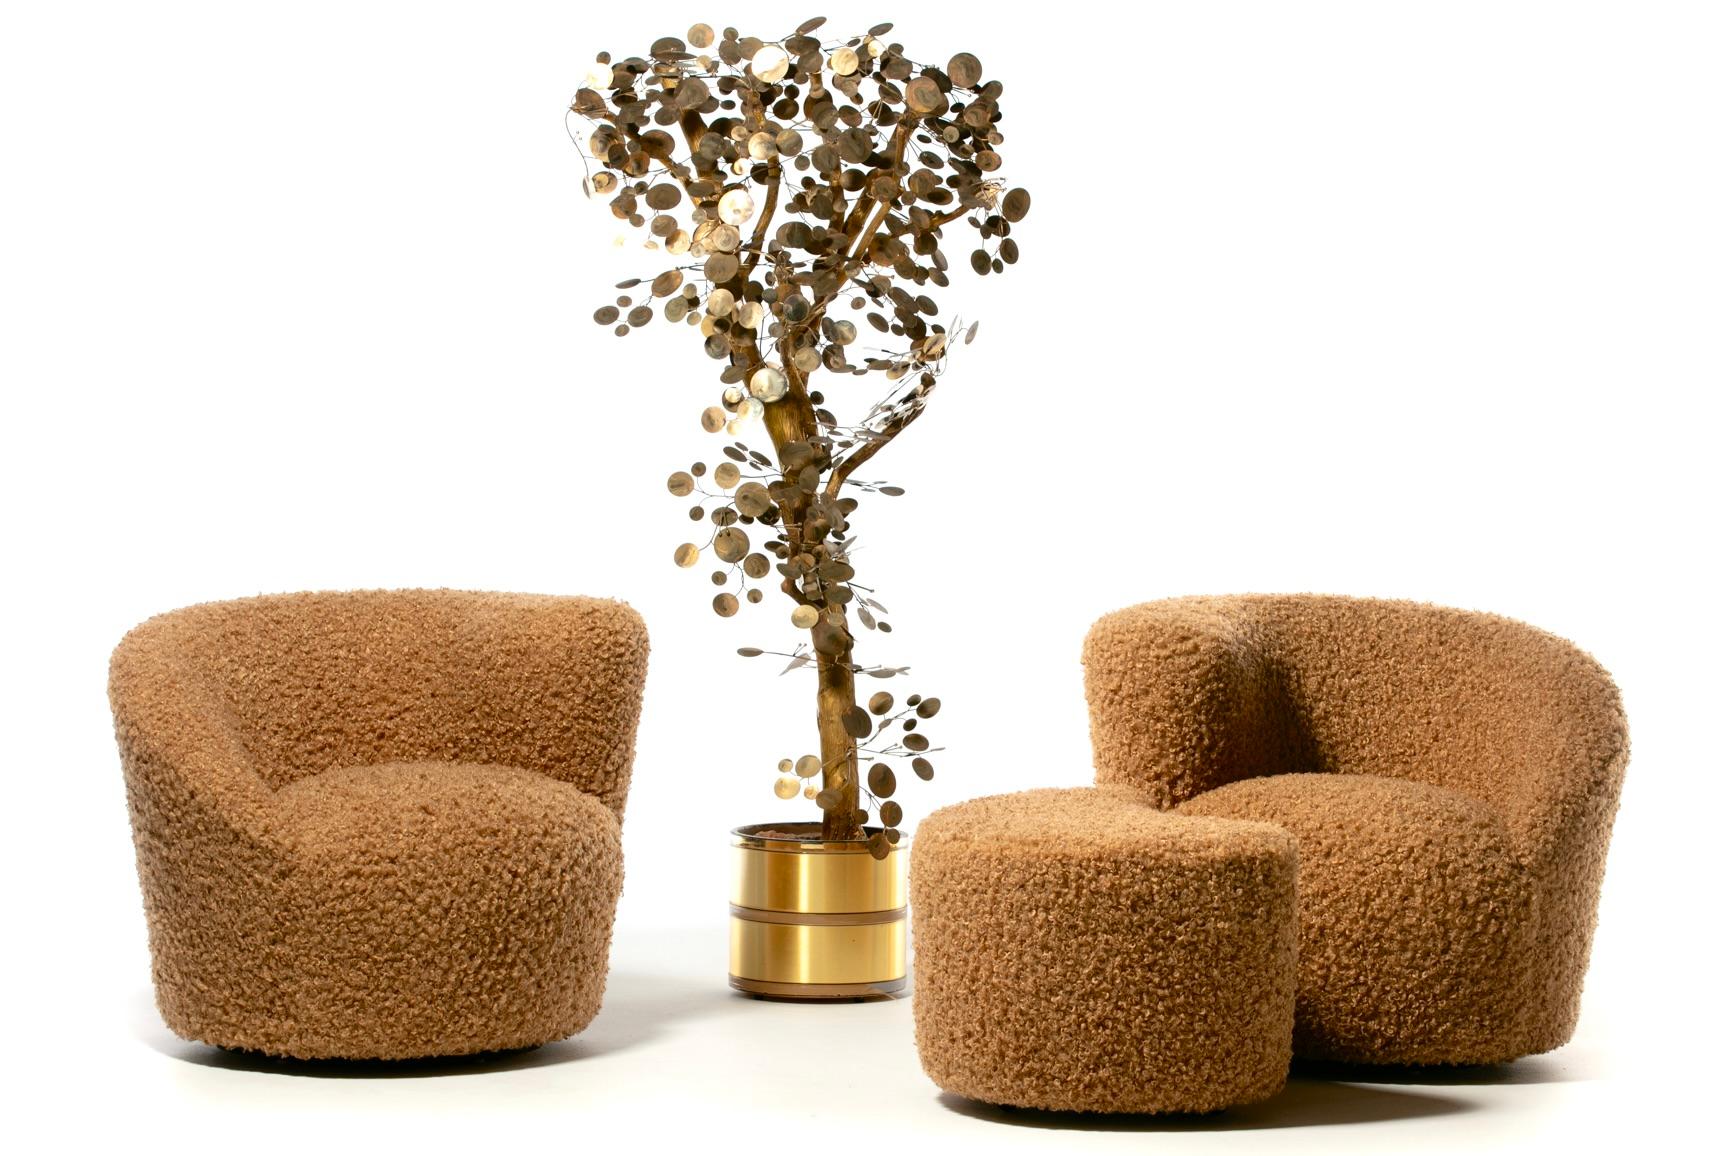 Amongst the most popular Vladimir Kagan designs, these Nautilus swivel lounge chairs are sculptural, comfortable and fun, and were recently professionally reupholstered in super soft curly camel. Modern with a warm and inviting texture. Corkscrew